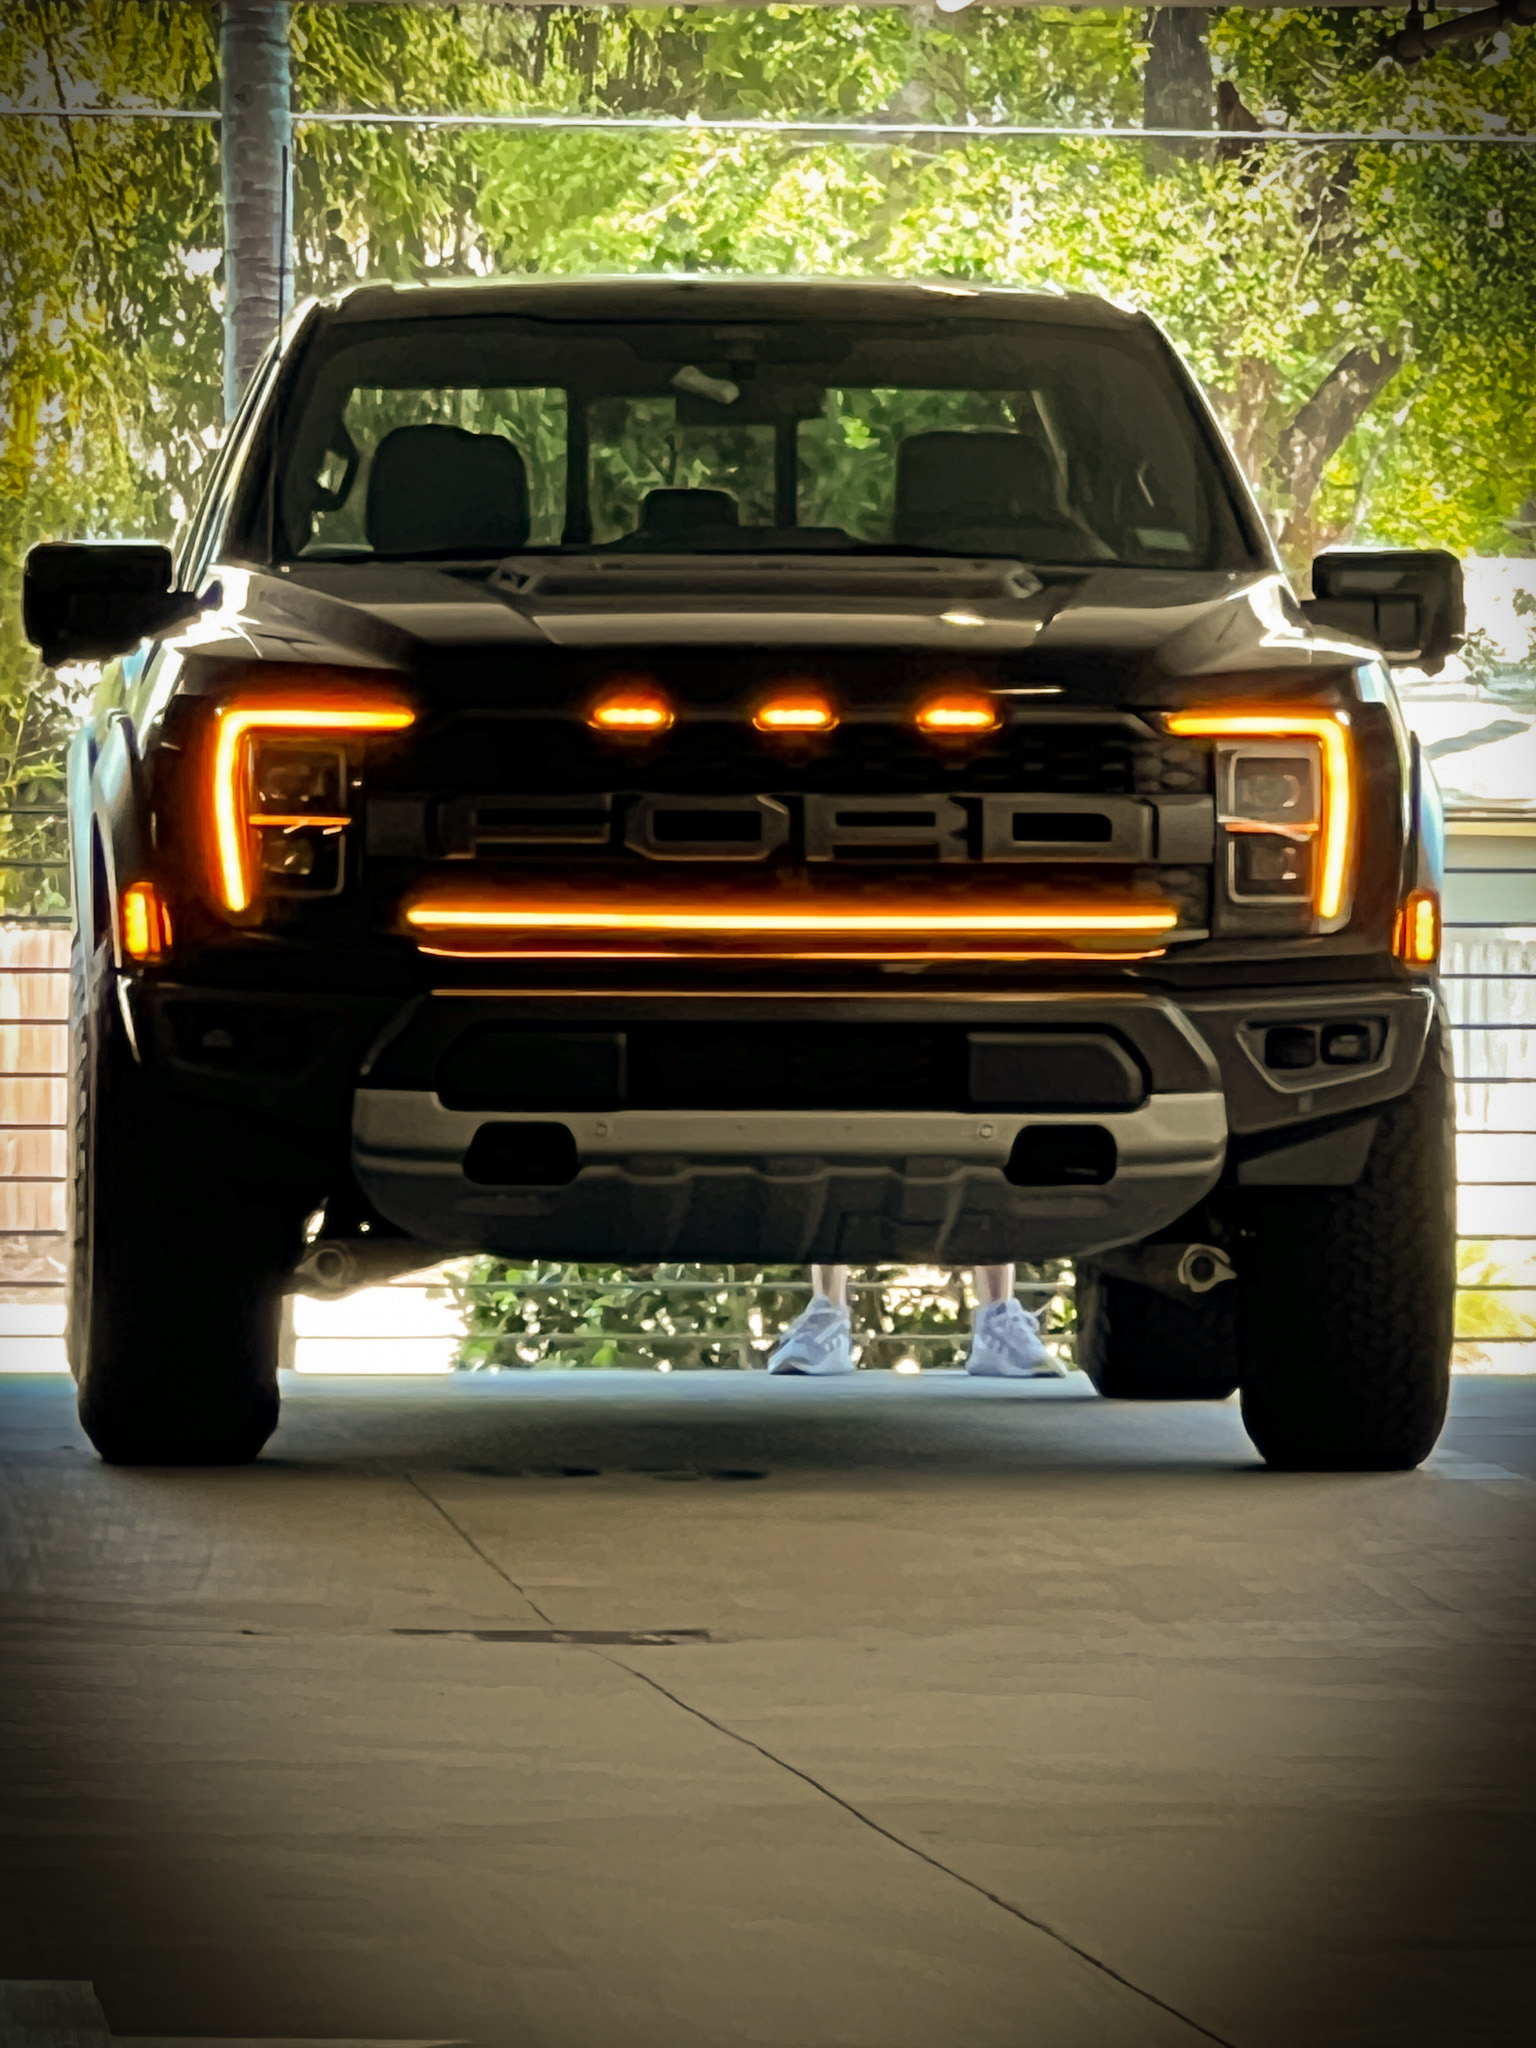 Ford Bronco New Bronco LED Grille Lights Launching ADDB8418-3BCC-4660-AD35-203E076D1F9C